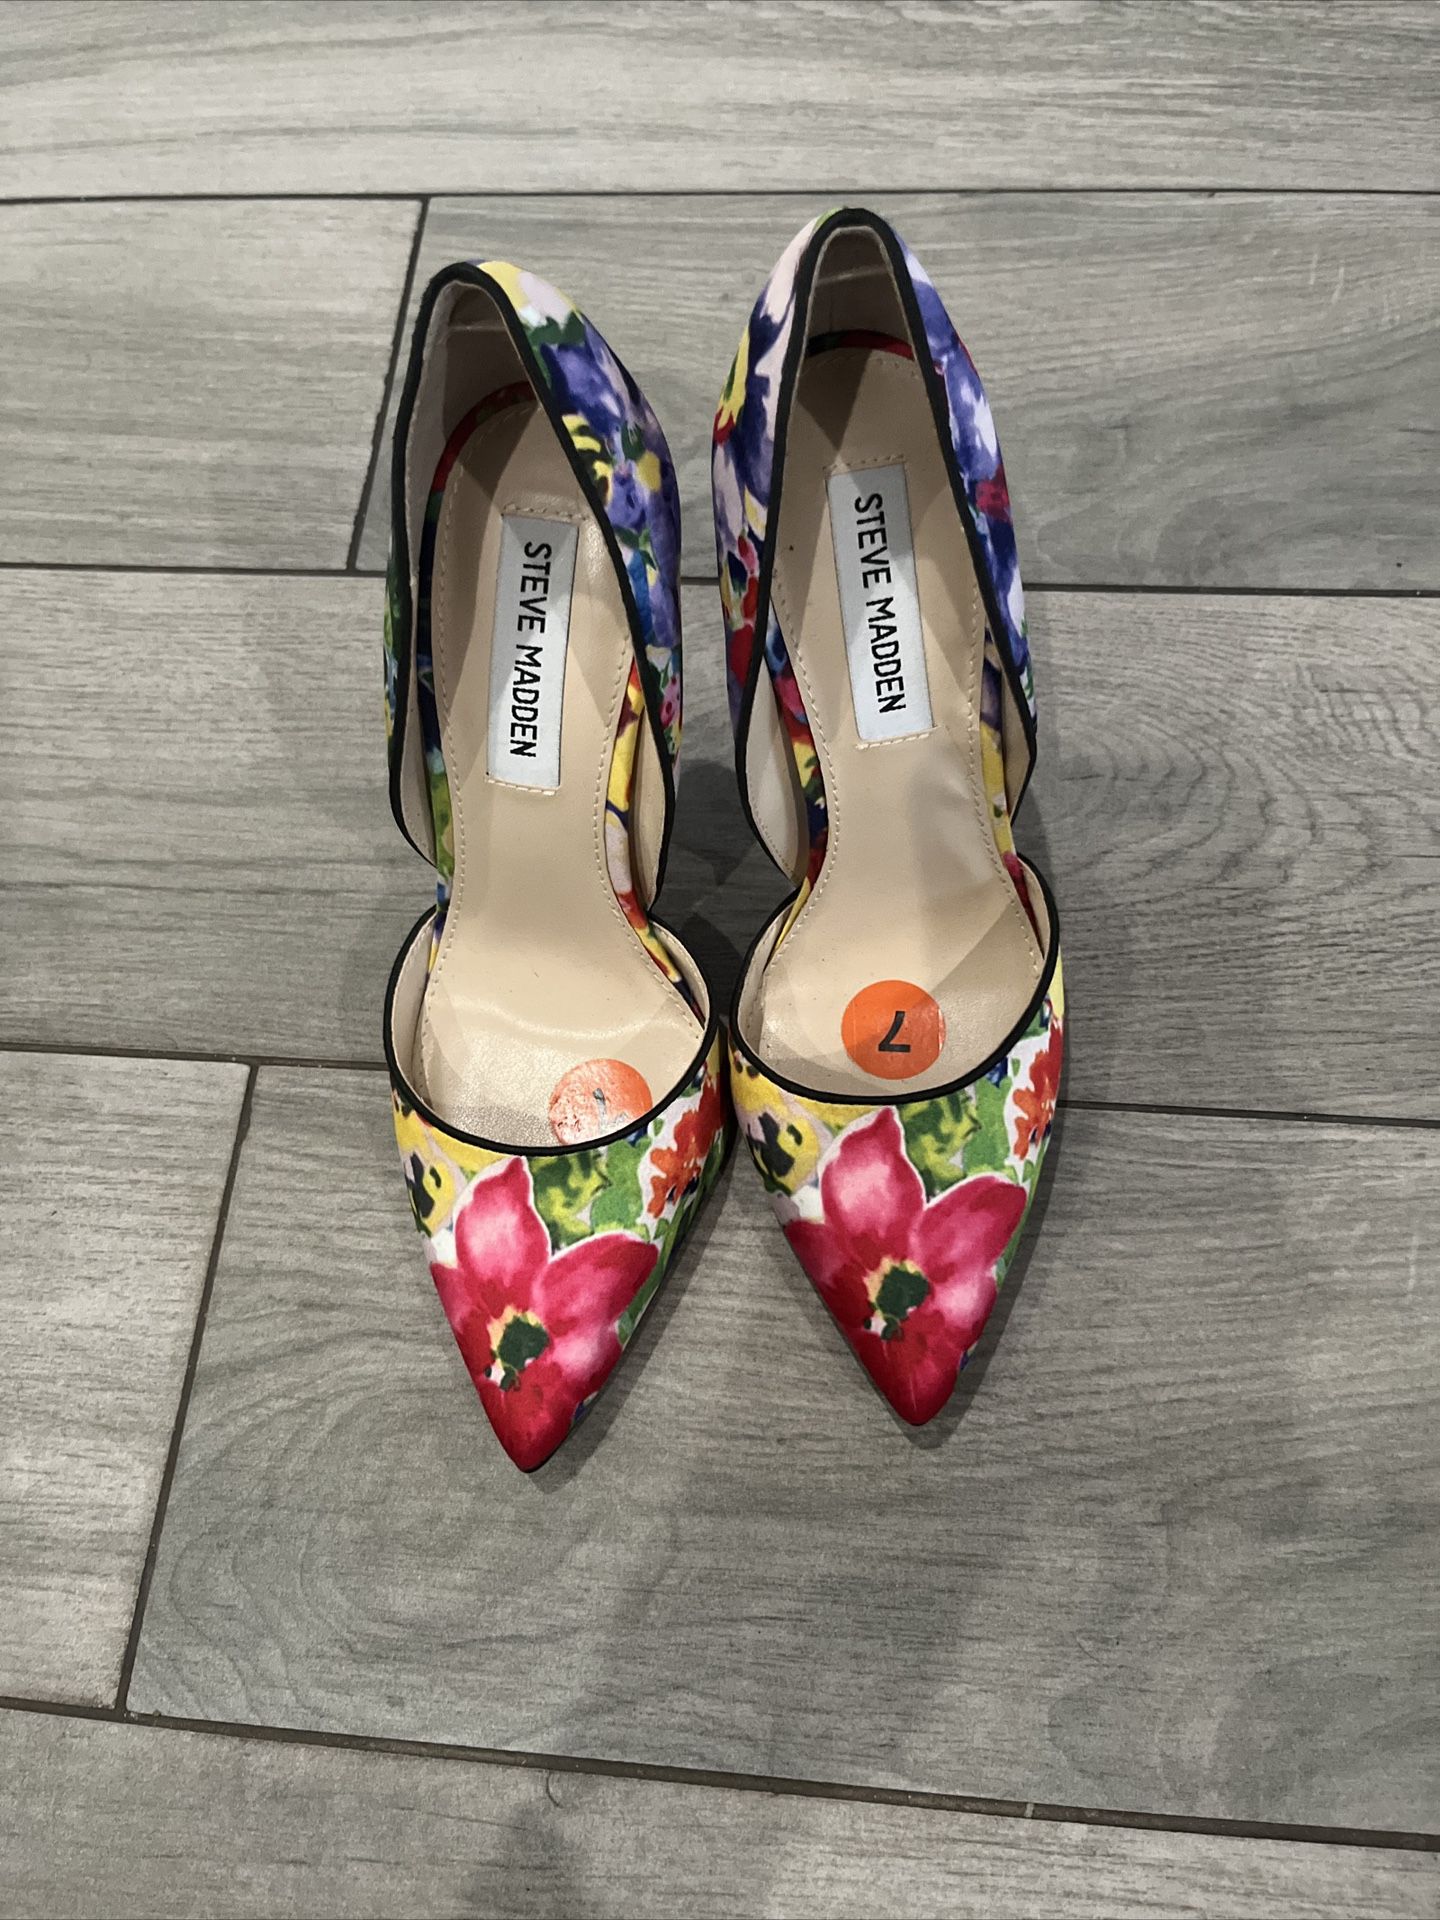 Steve Madden Varcityy Colorful Floral Red Pink Green 4.5" Heels Pump Shoes 7 Brand New